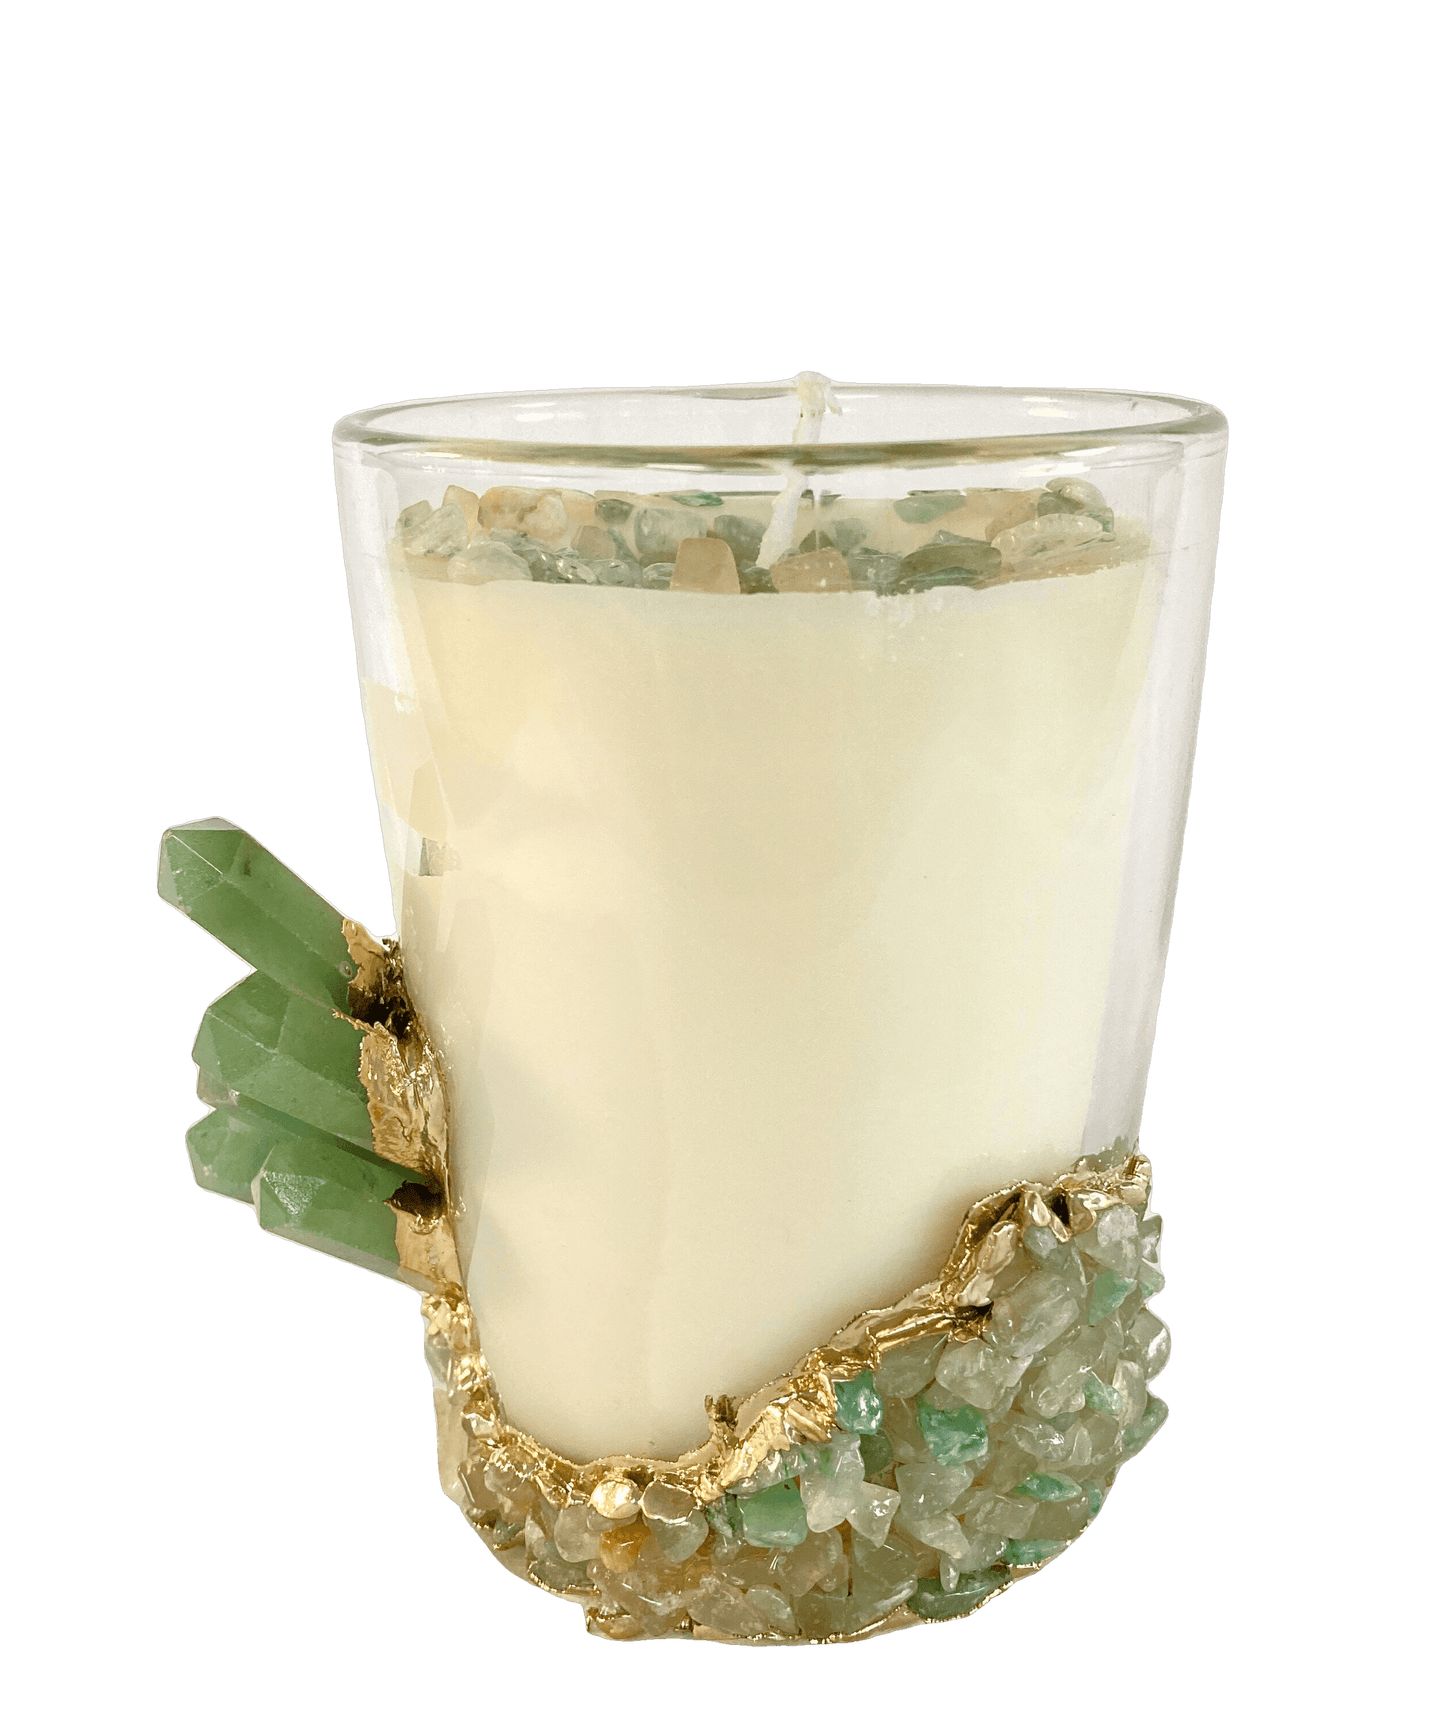 Green Agate Quartz Crystal Scented Soy Candles in Glass Mug - Set of 2 - MAIA HOMES